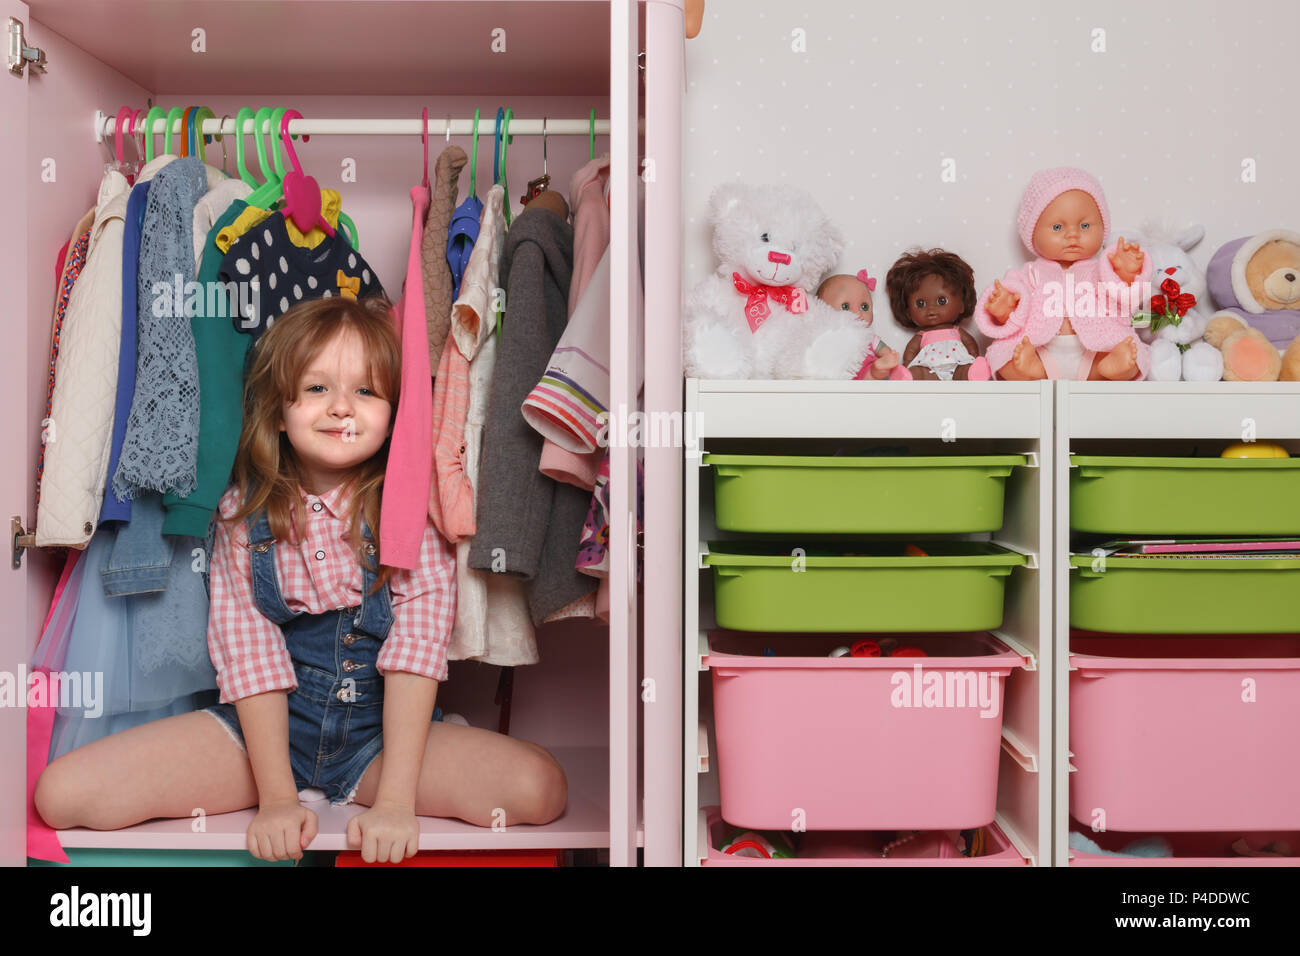 A little girl is sitting in a closet with a children's department. Storage system for children's things and toys Stock Photo